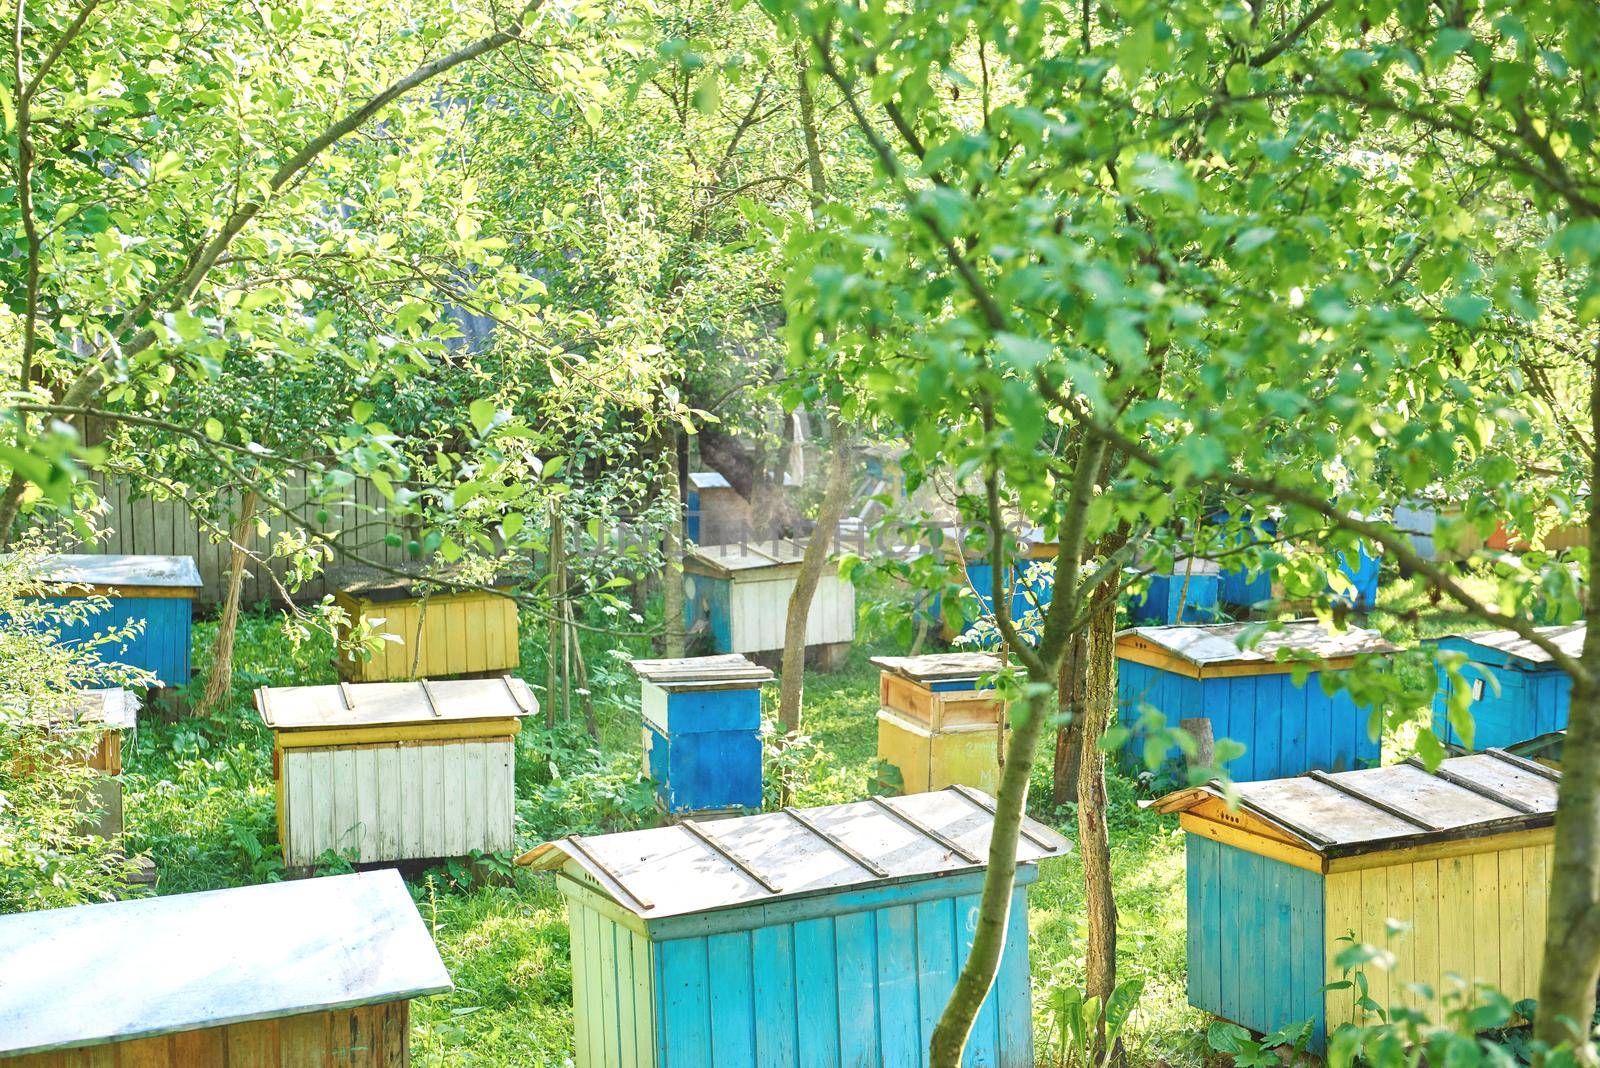 Shot of a garden with beehives farming natural production producing profession organic honey concept.